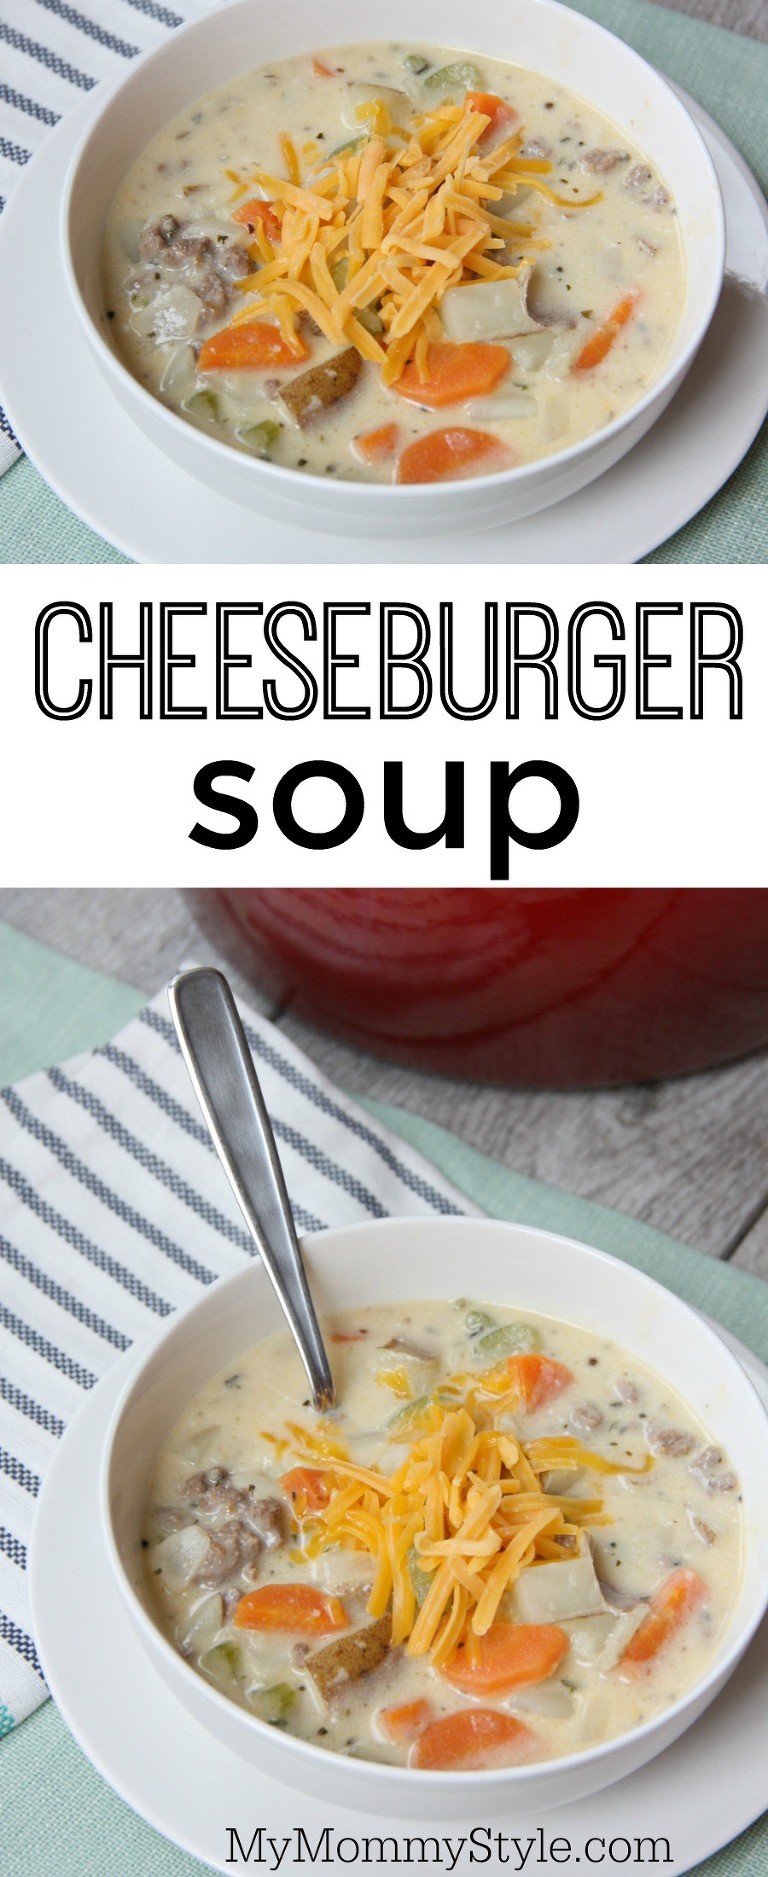 Cheeseburger soup - My Mommy Style